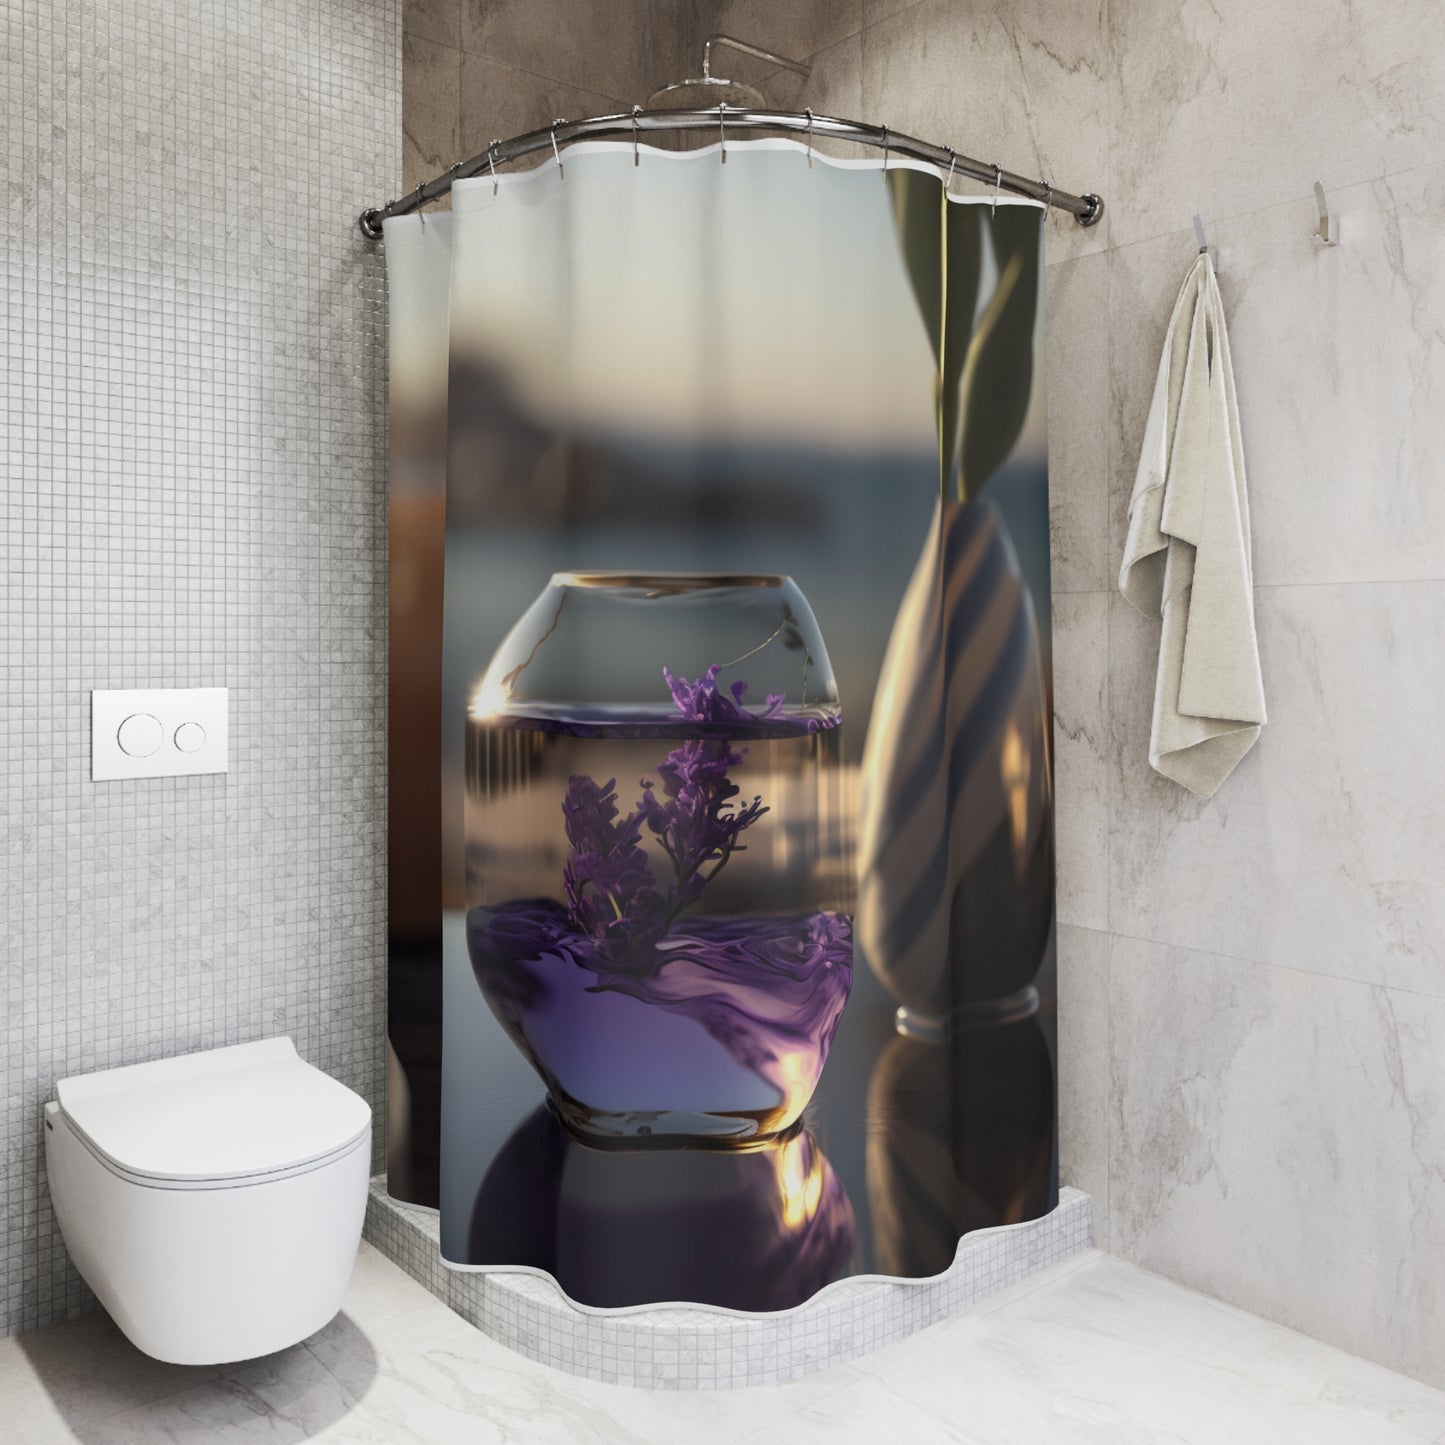 Polyester Shower Curtain Lavender in a vase 1